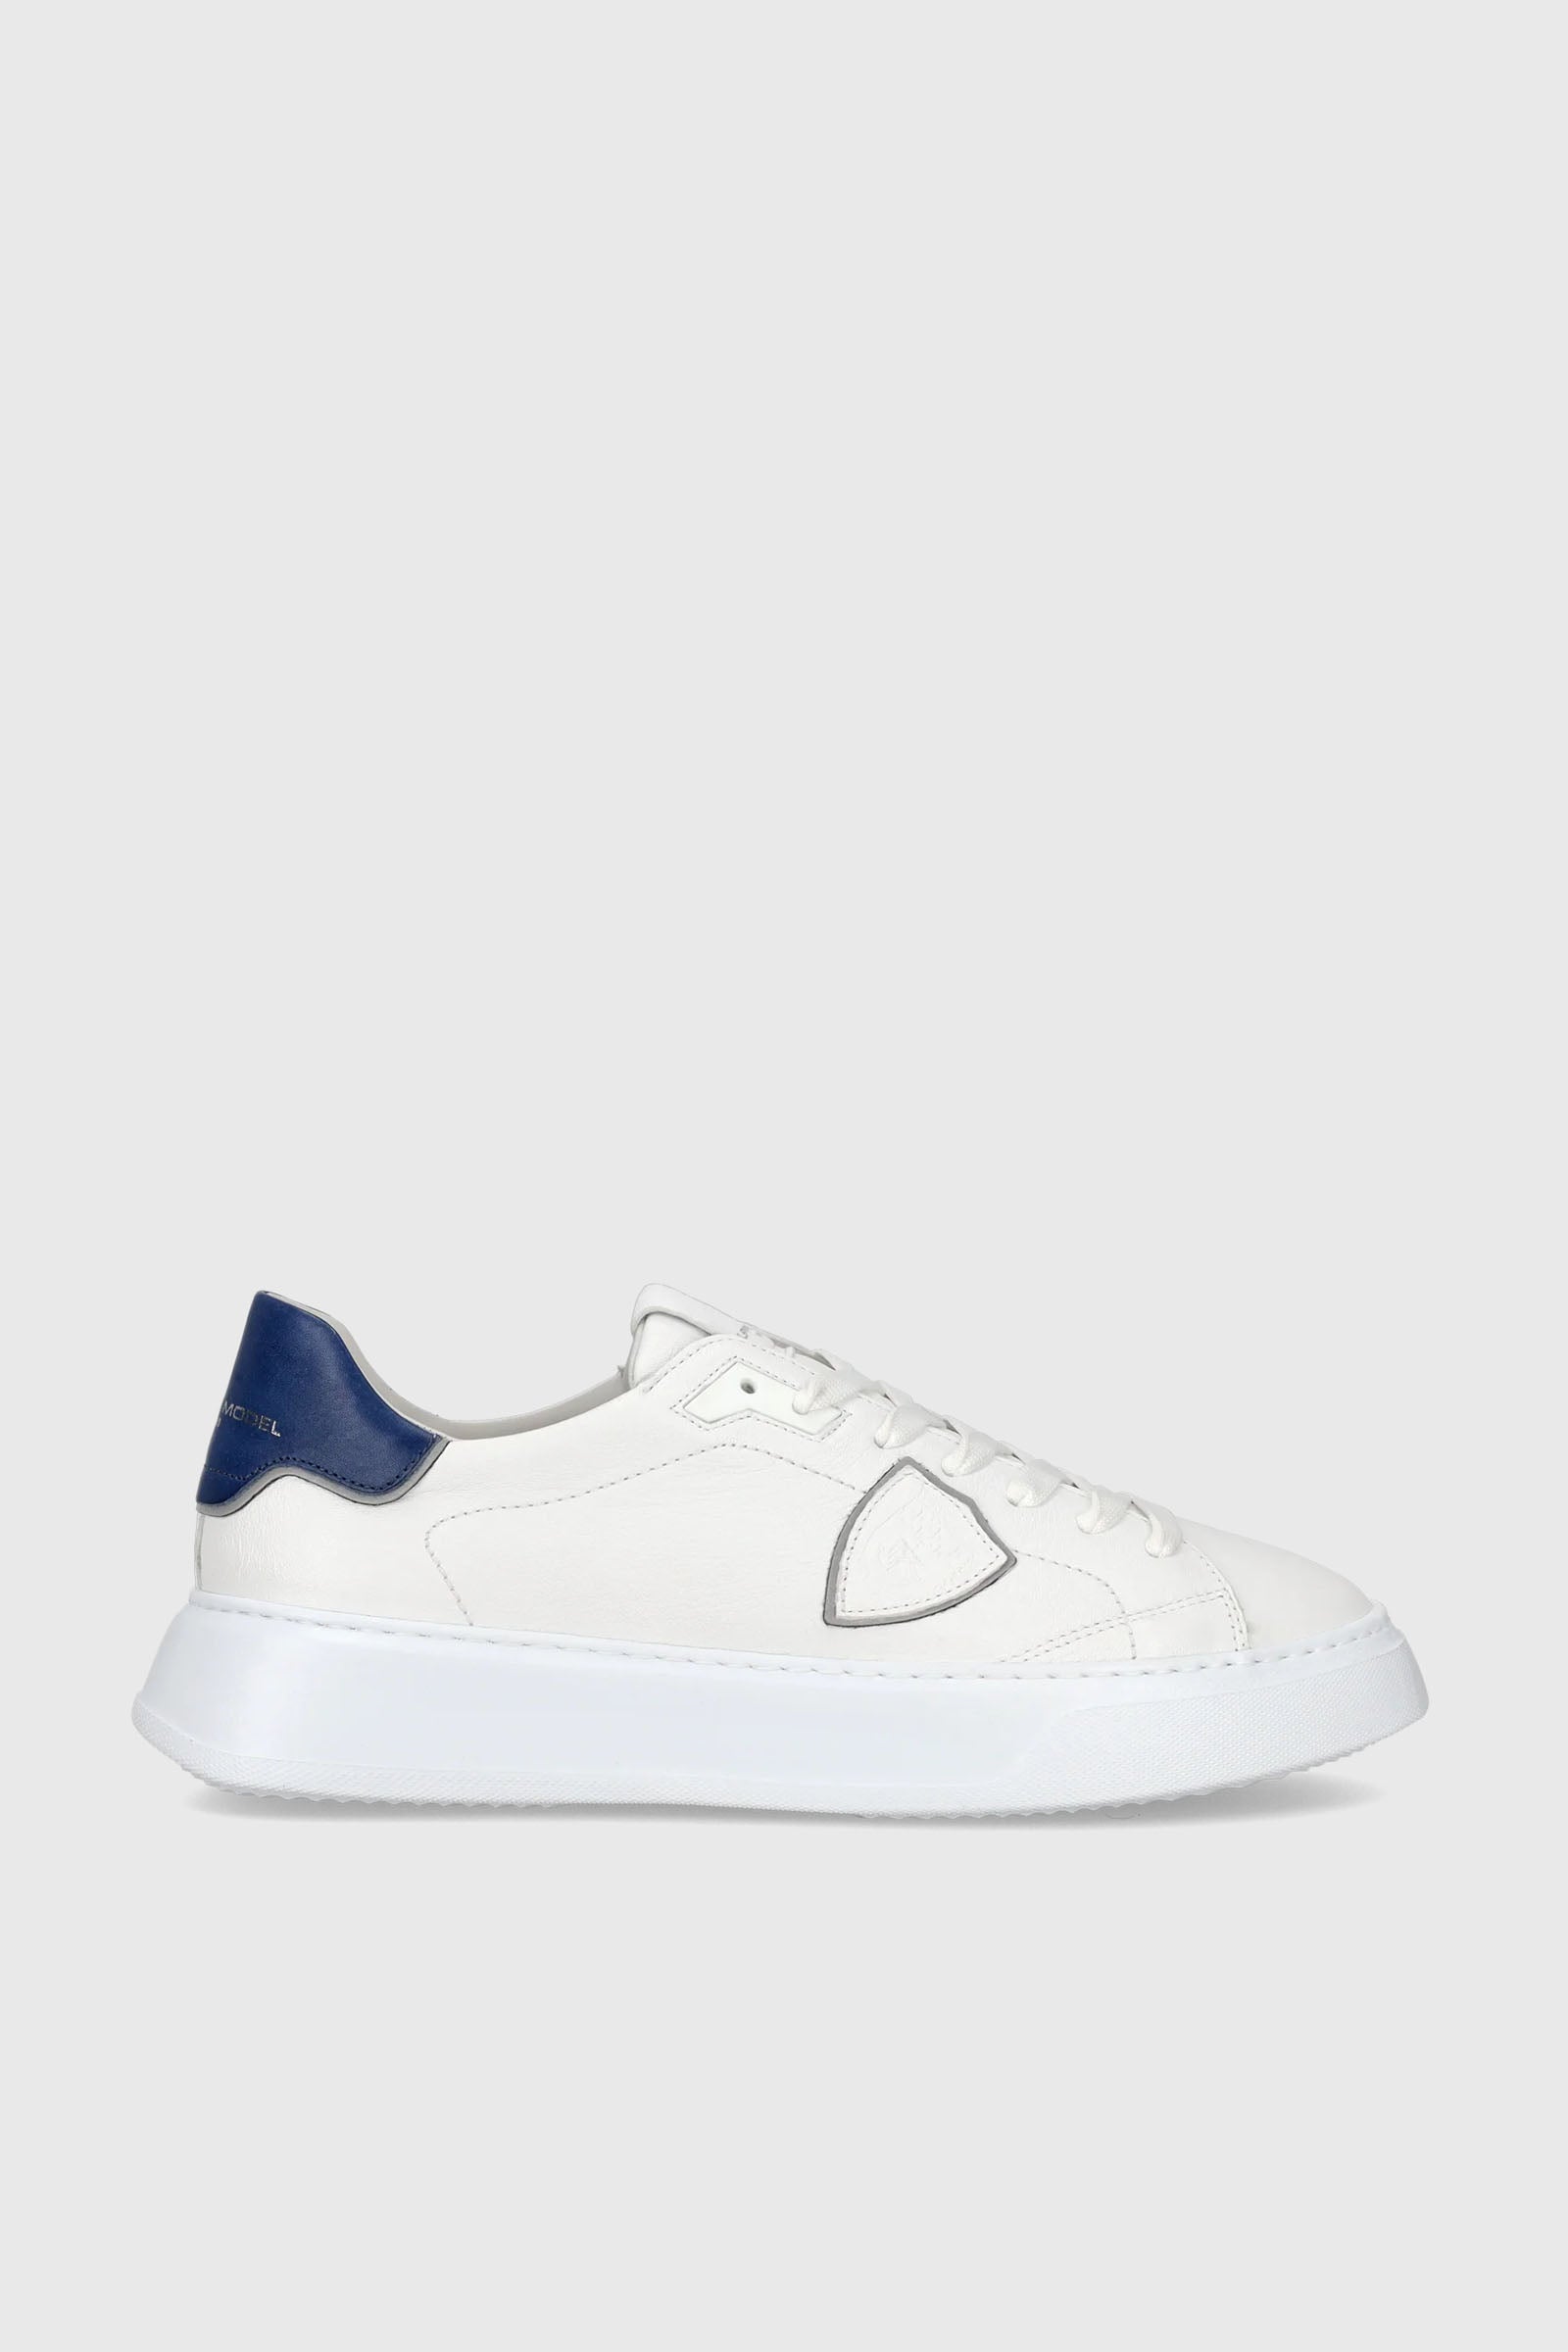 Philippe Model Sneaker Temple West Leather White/Blue - 1